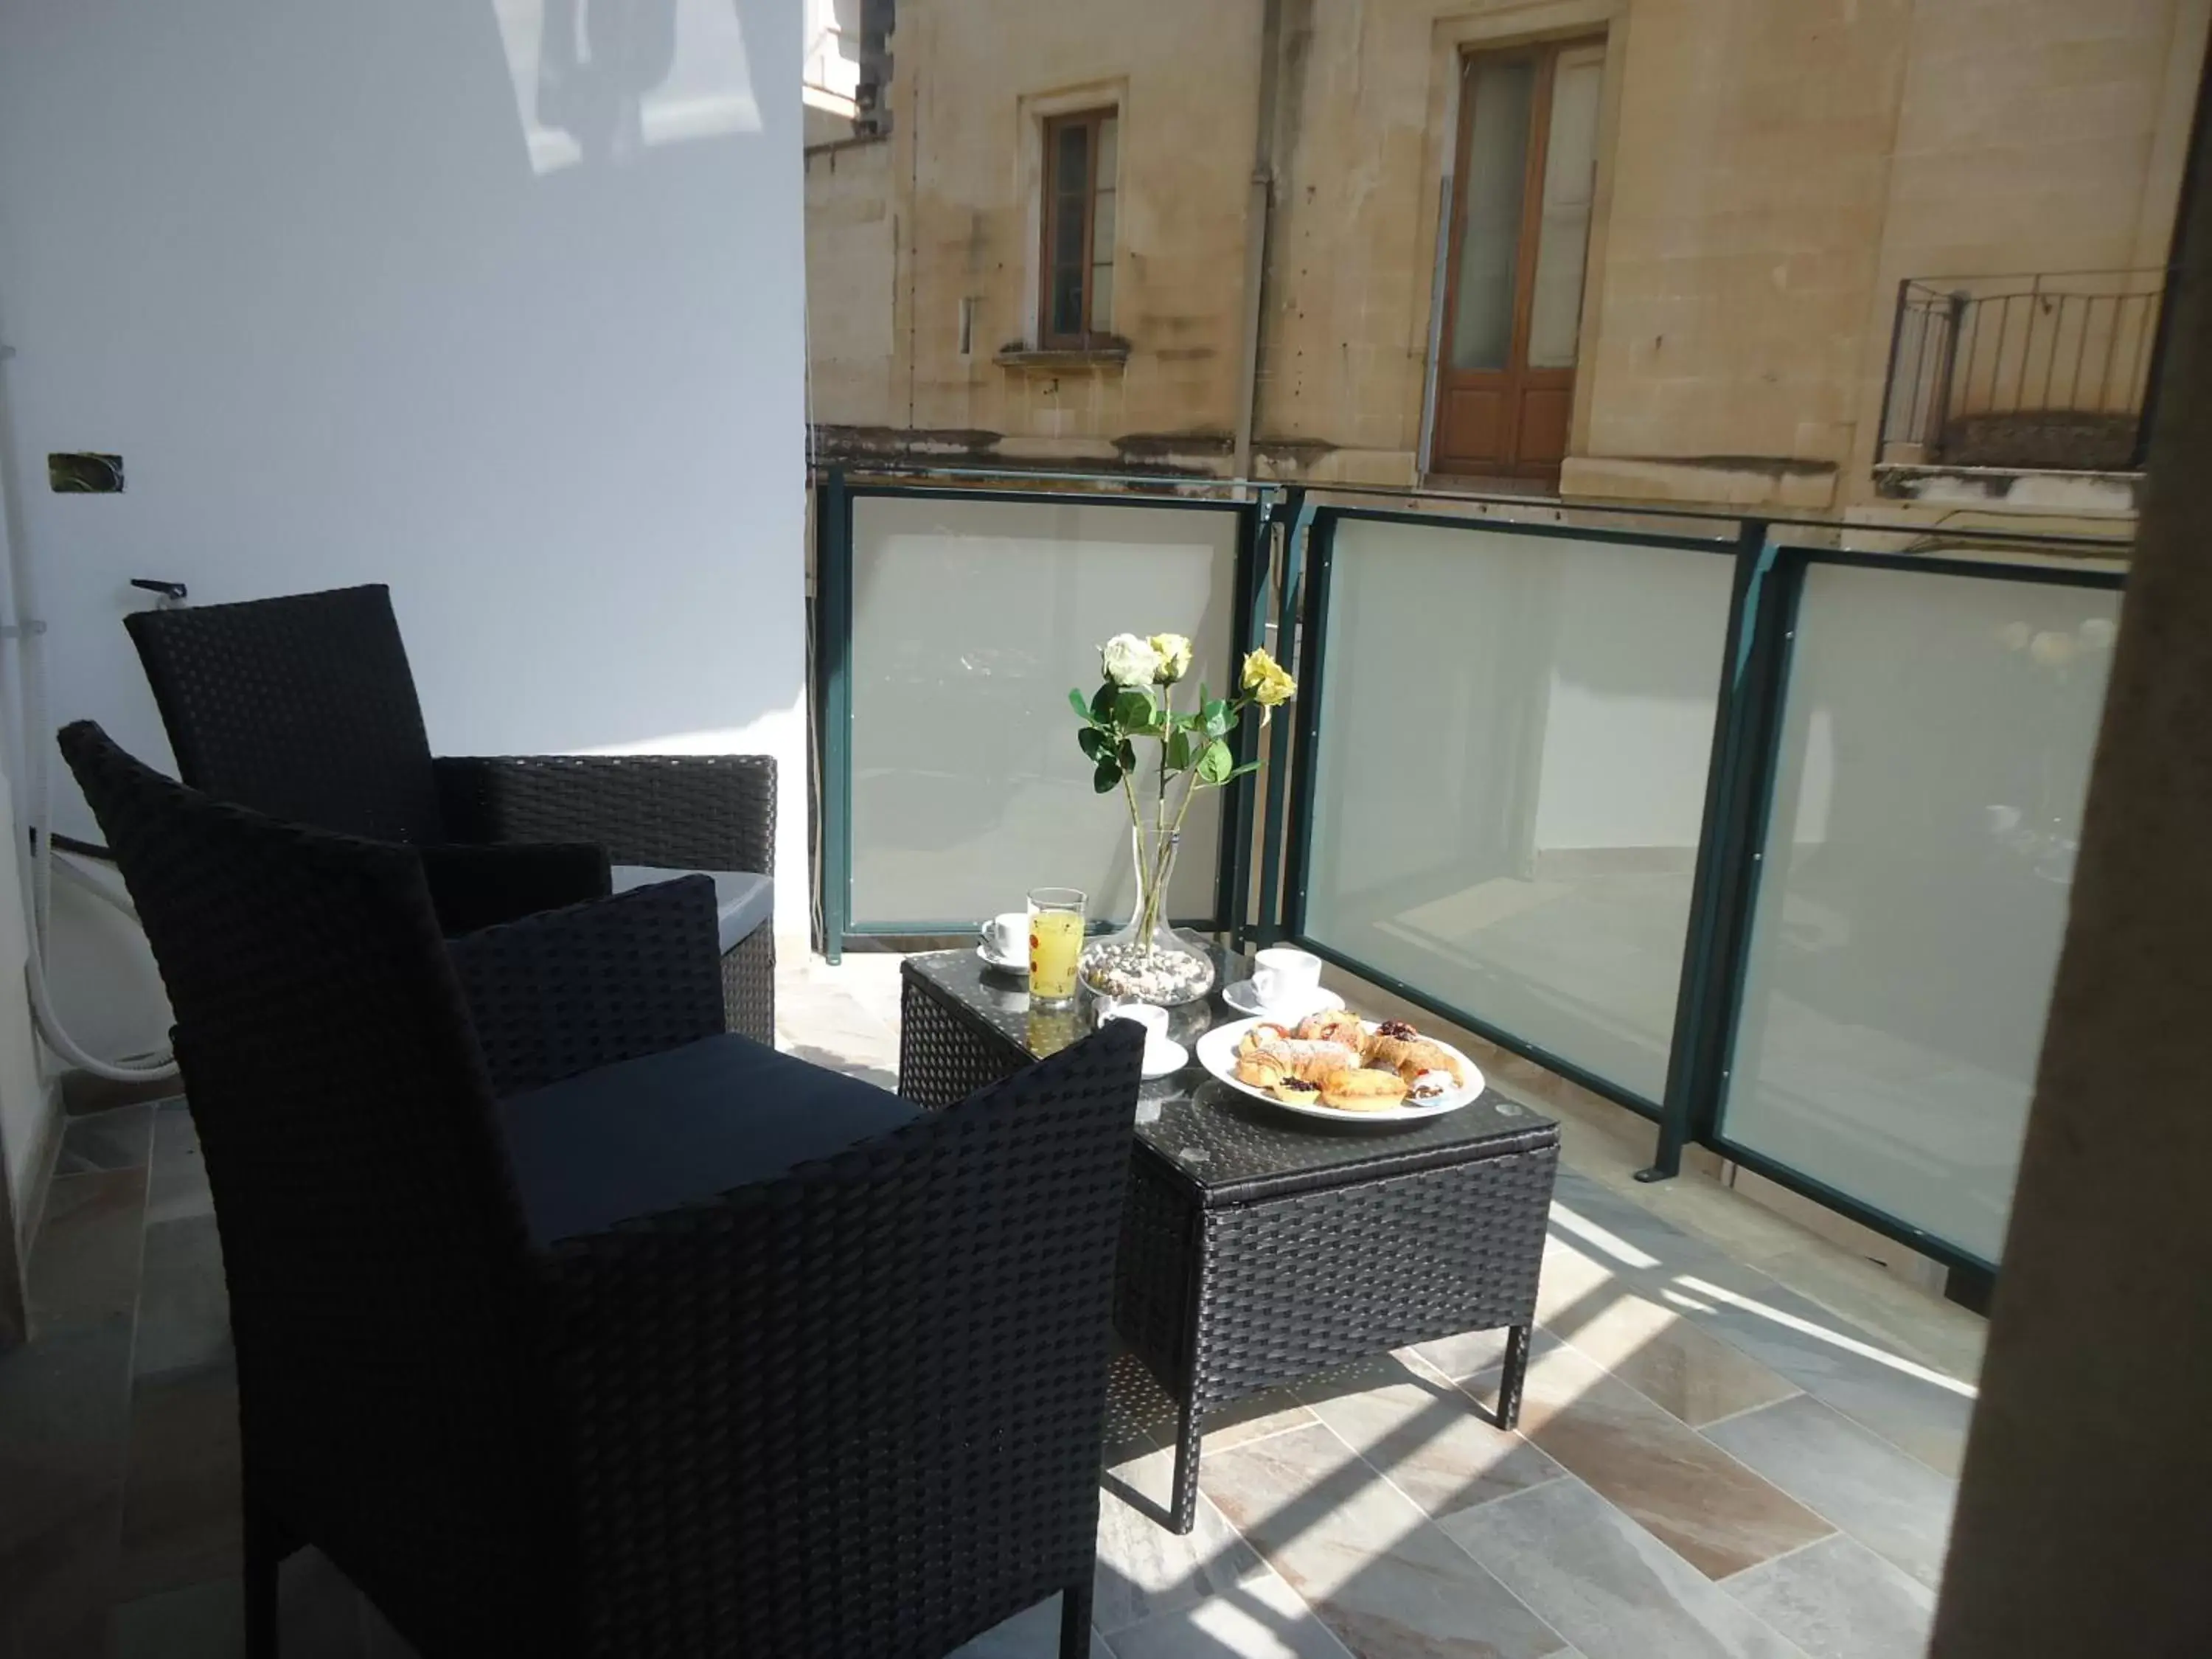 Food and drinks in LECCE MON AMOUR B&B